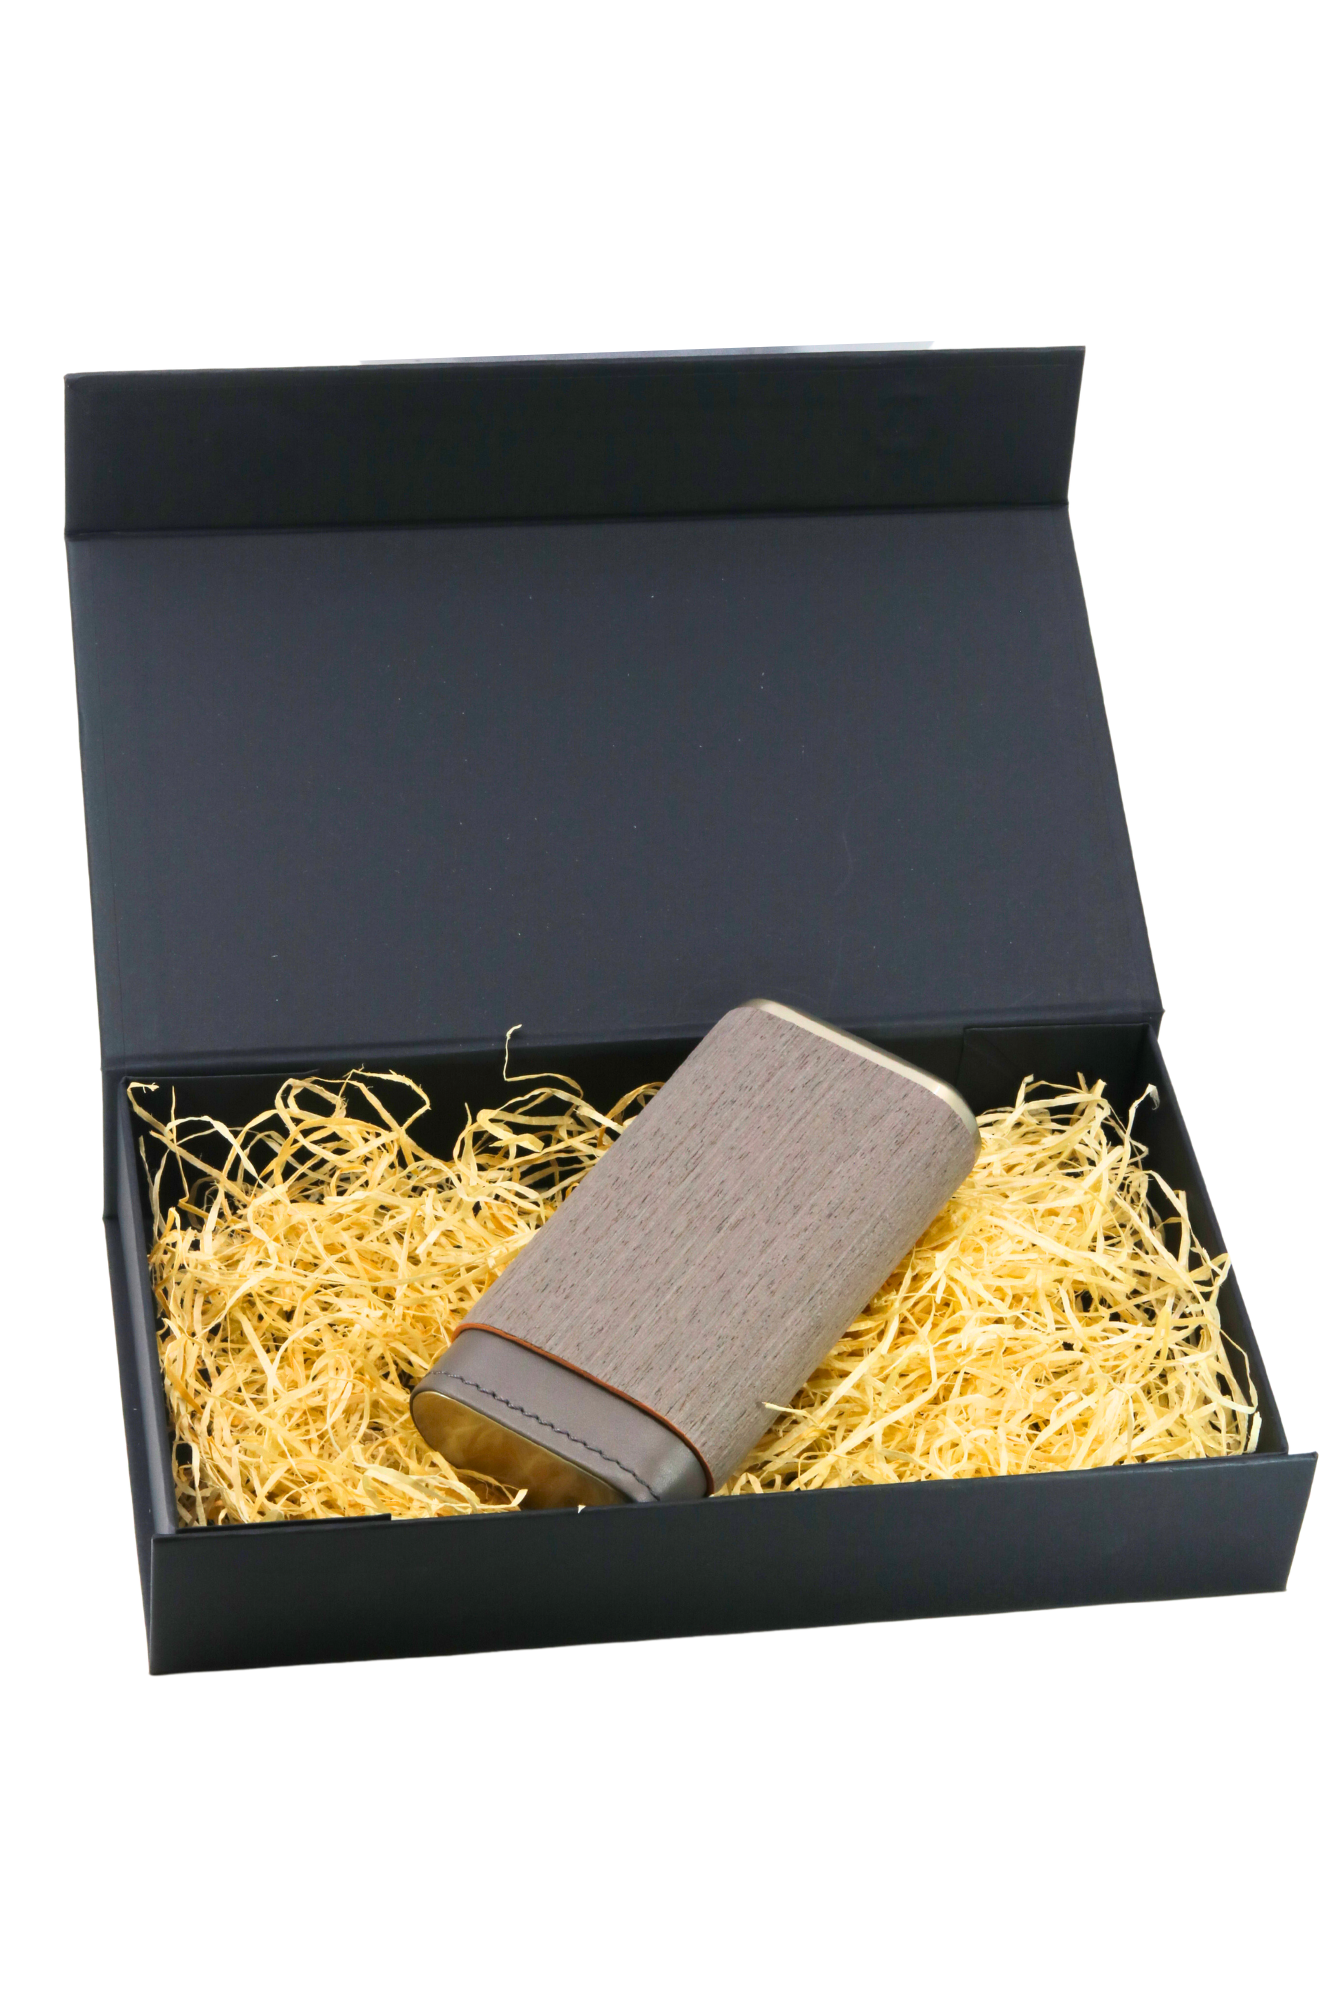 Angelo Lined Cigar Case - 3 Cigars